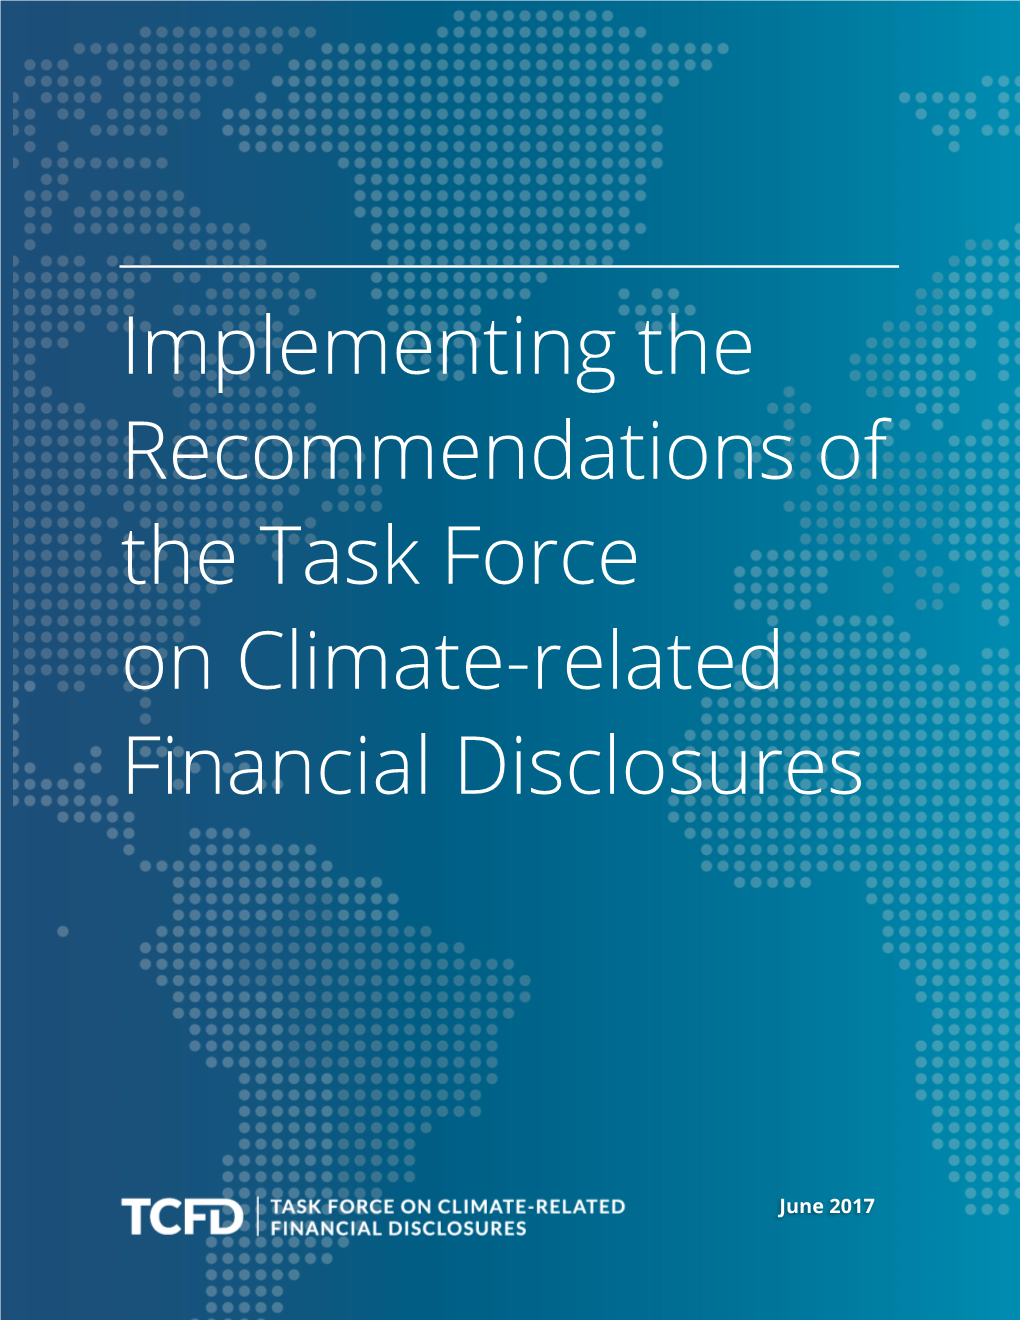 Task Force on Climate-Related Financial Disclosures